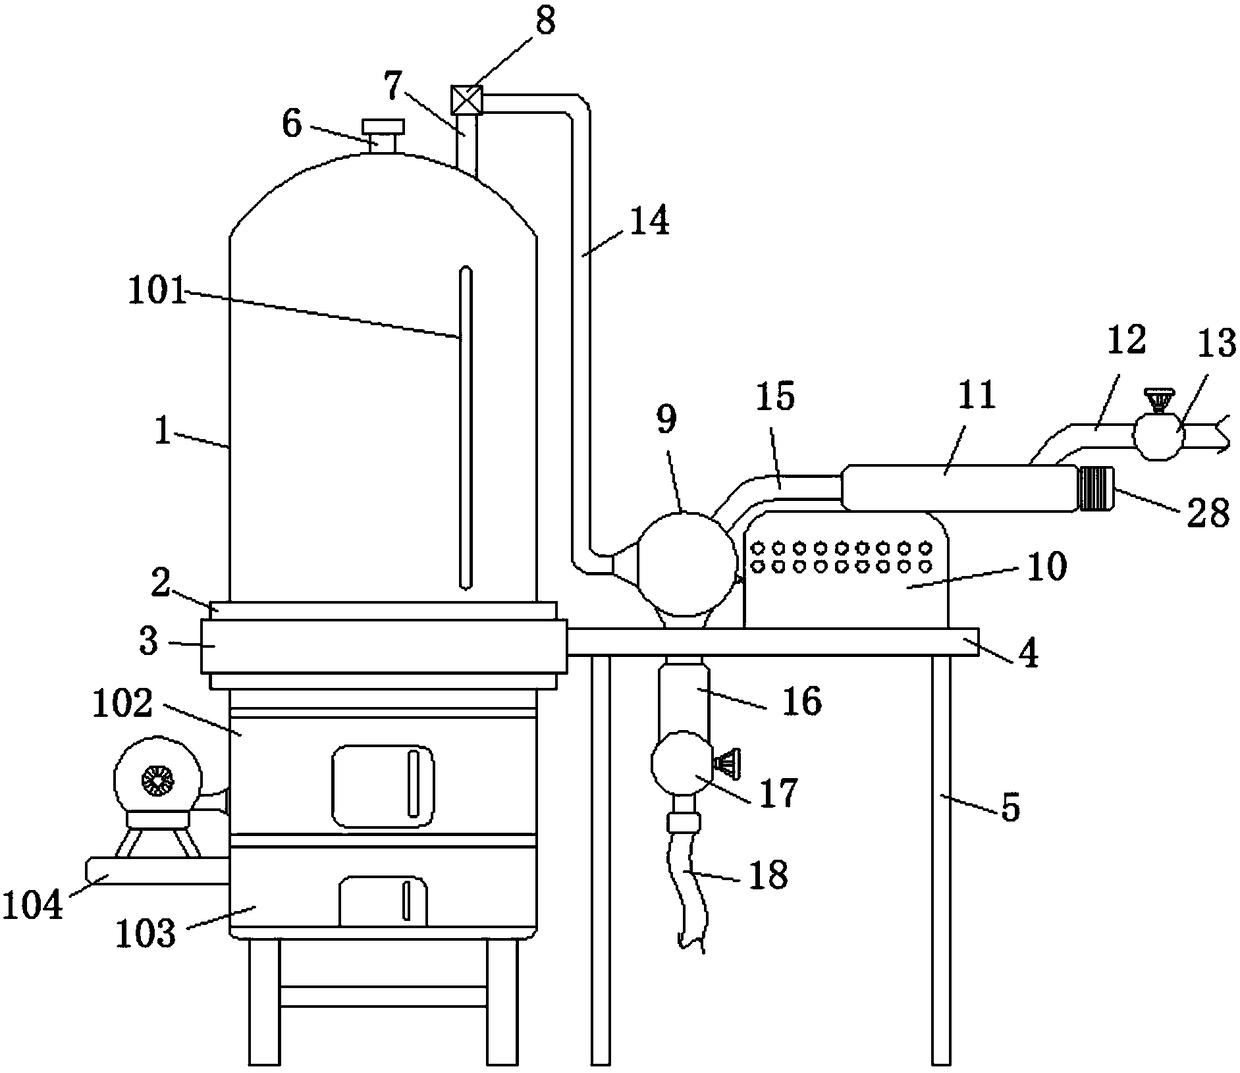 Steam generator with water filtering function